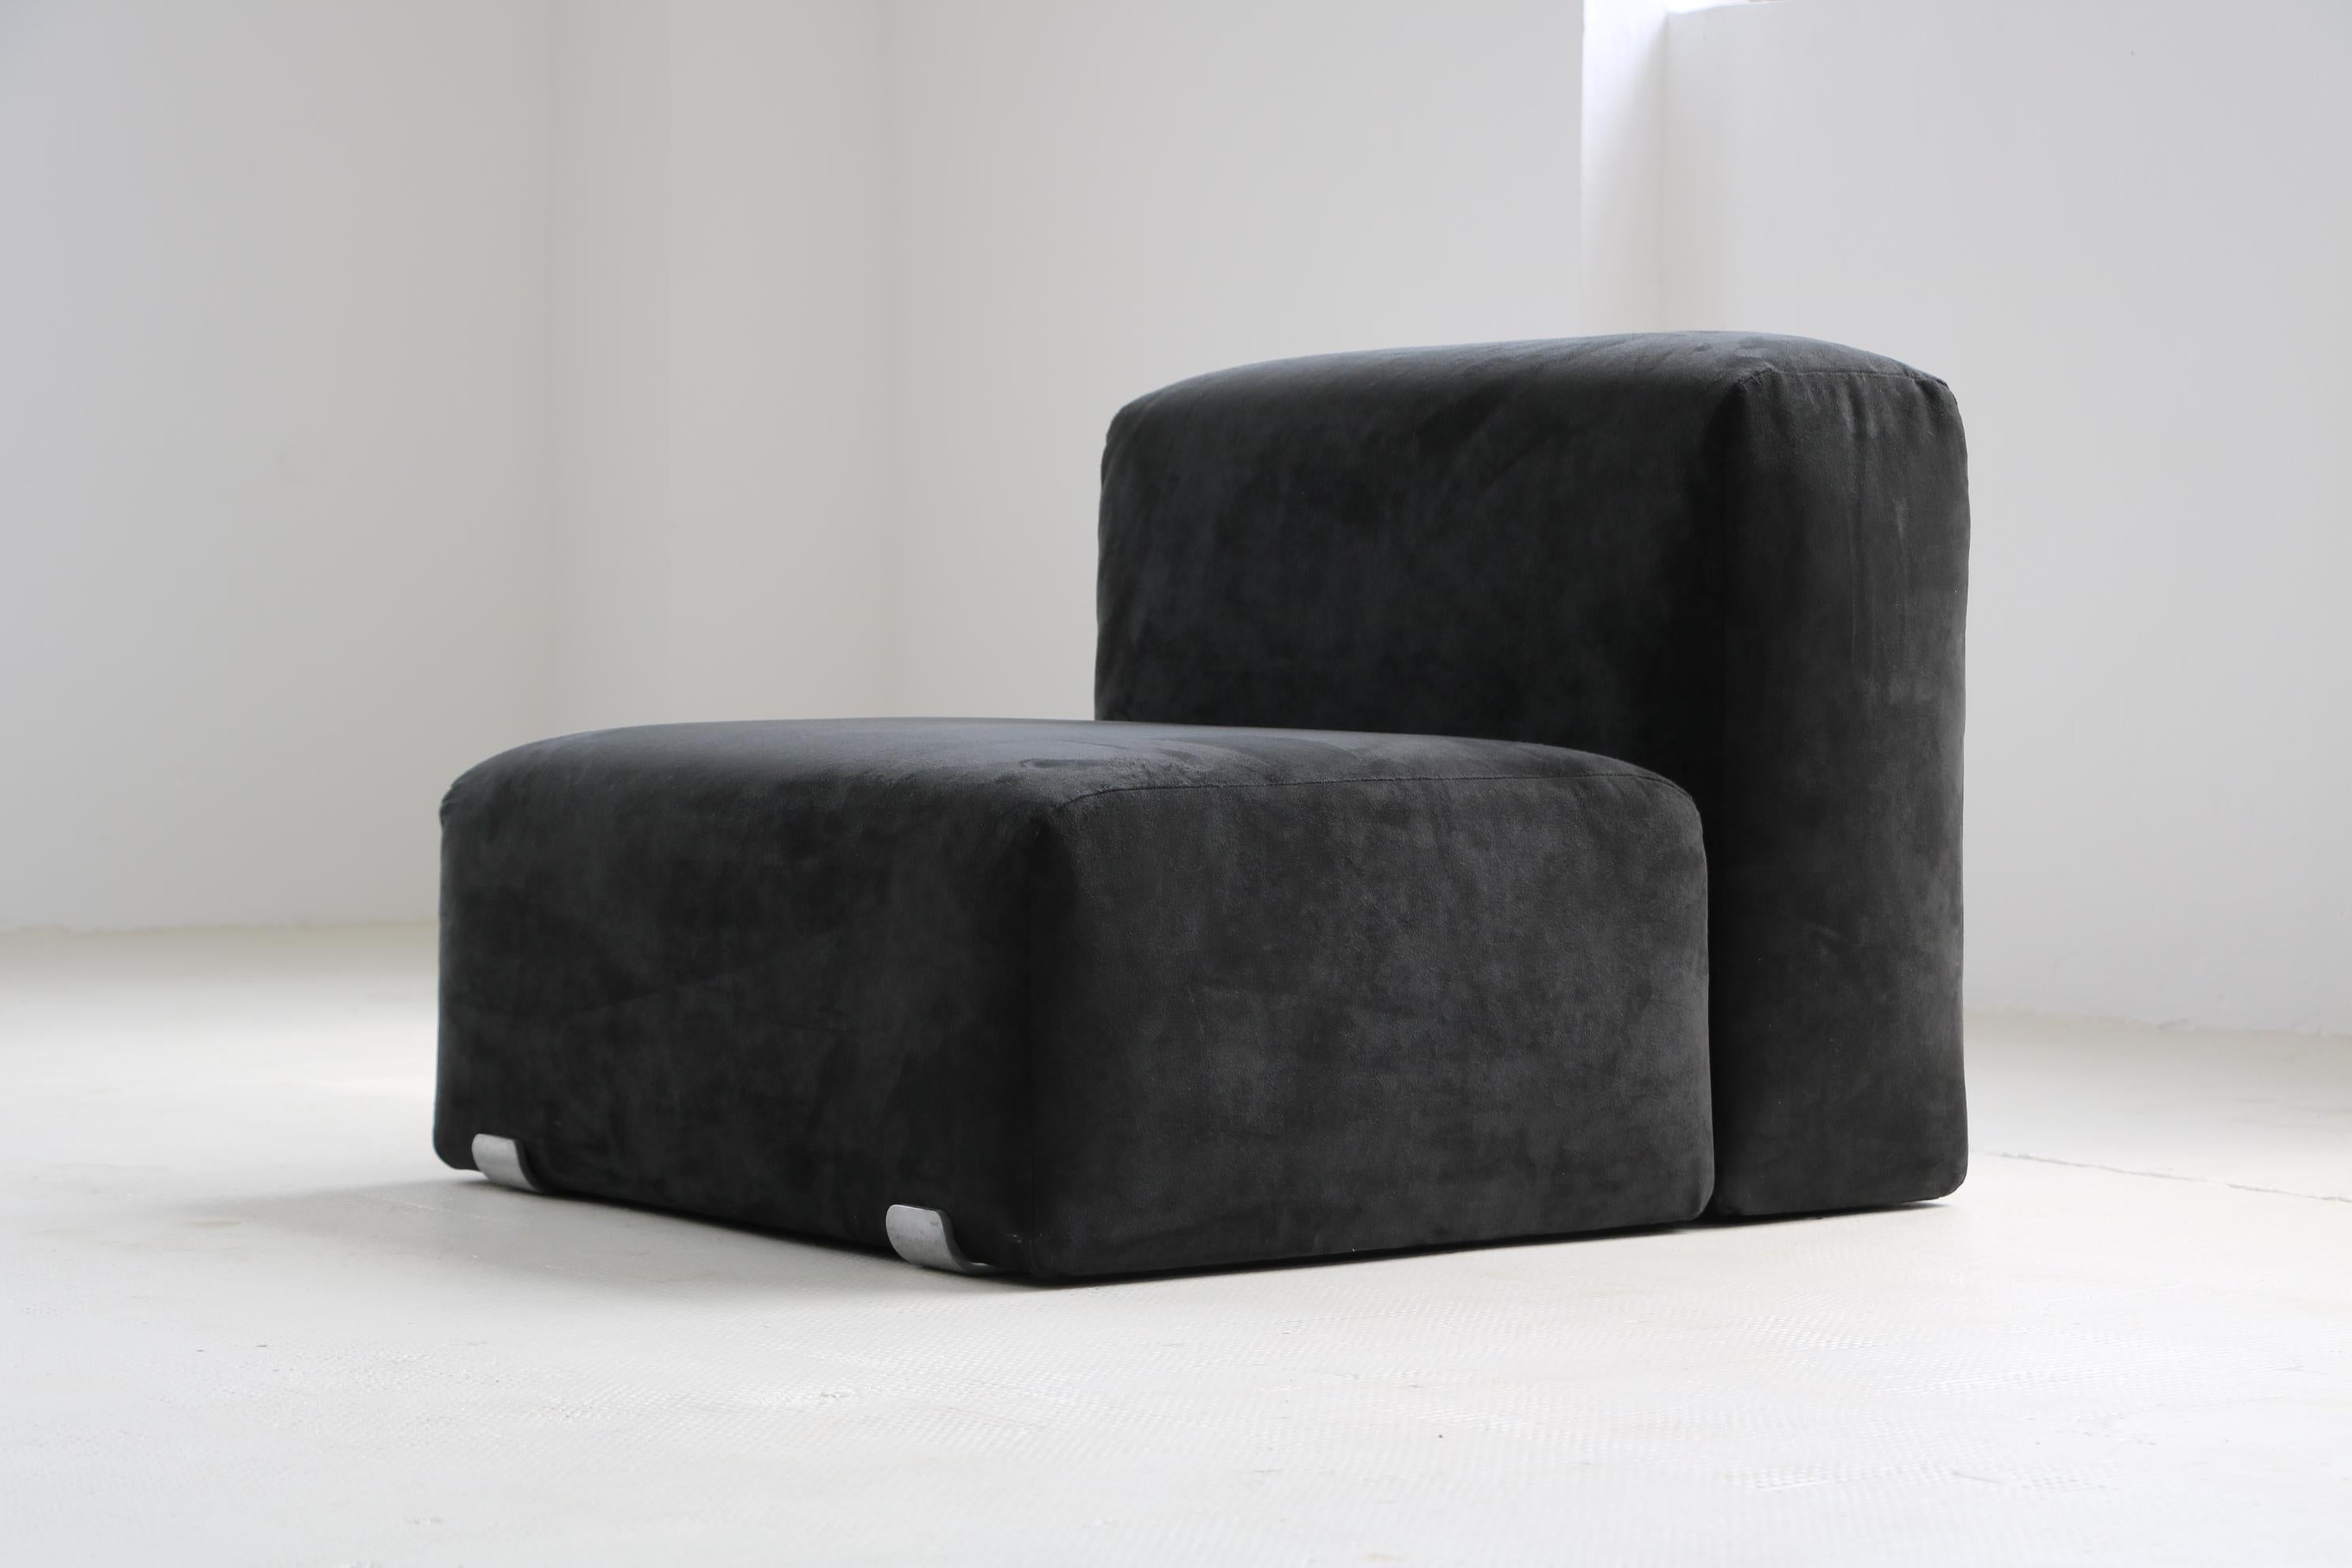 Kazuhide Takahama chair produced by Gavina in 1980.
Price is for the chair. You will find the sofa in another auction.
Upholstered body, cover suede black, model 'Marcel'.